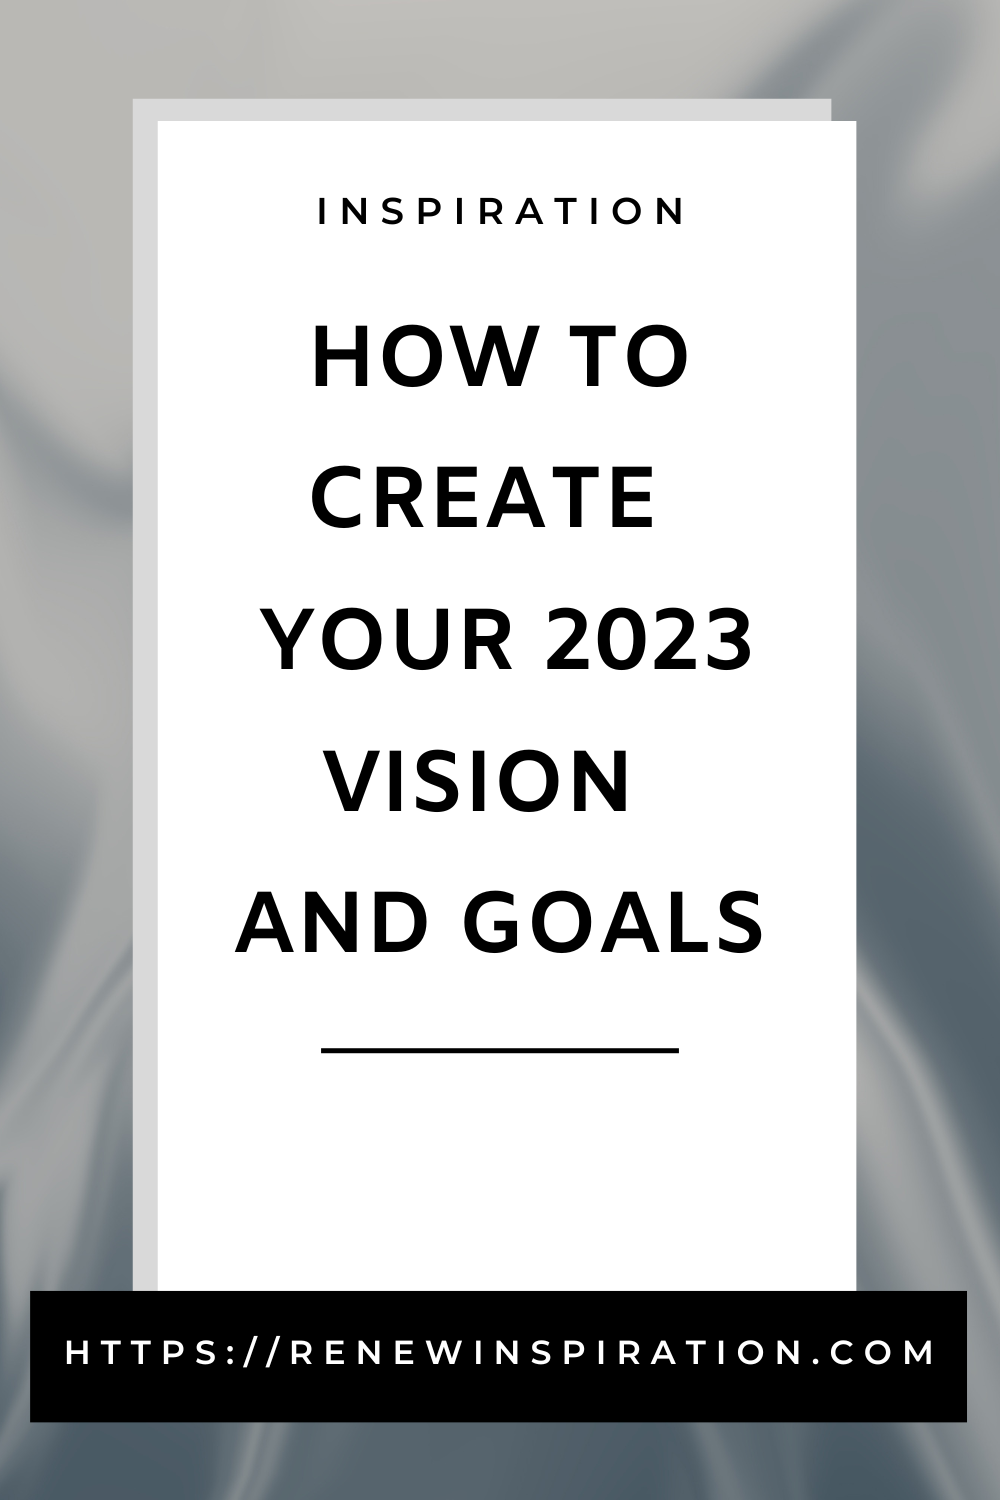 Renew Inspiration, How to Create Your 2023 Vision and Goals